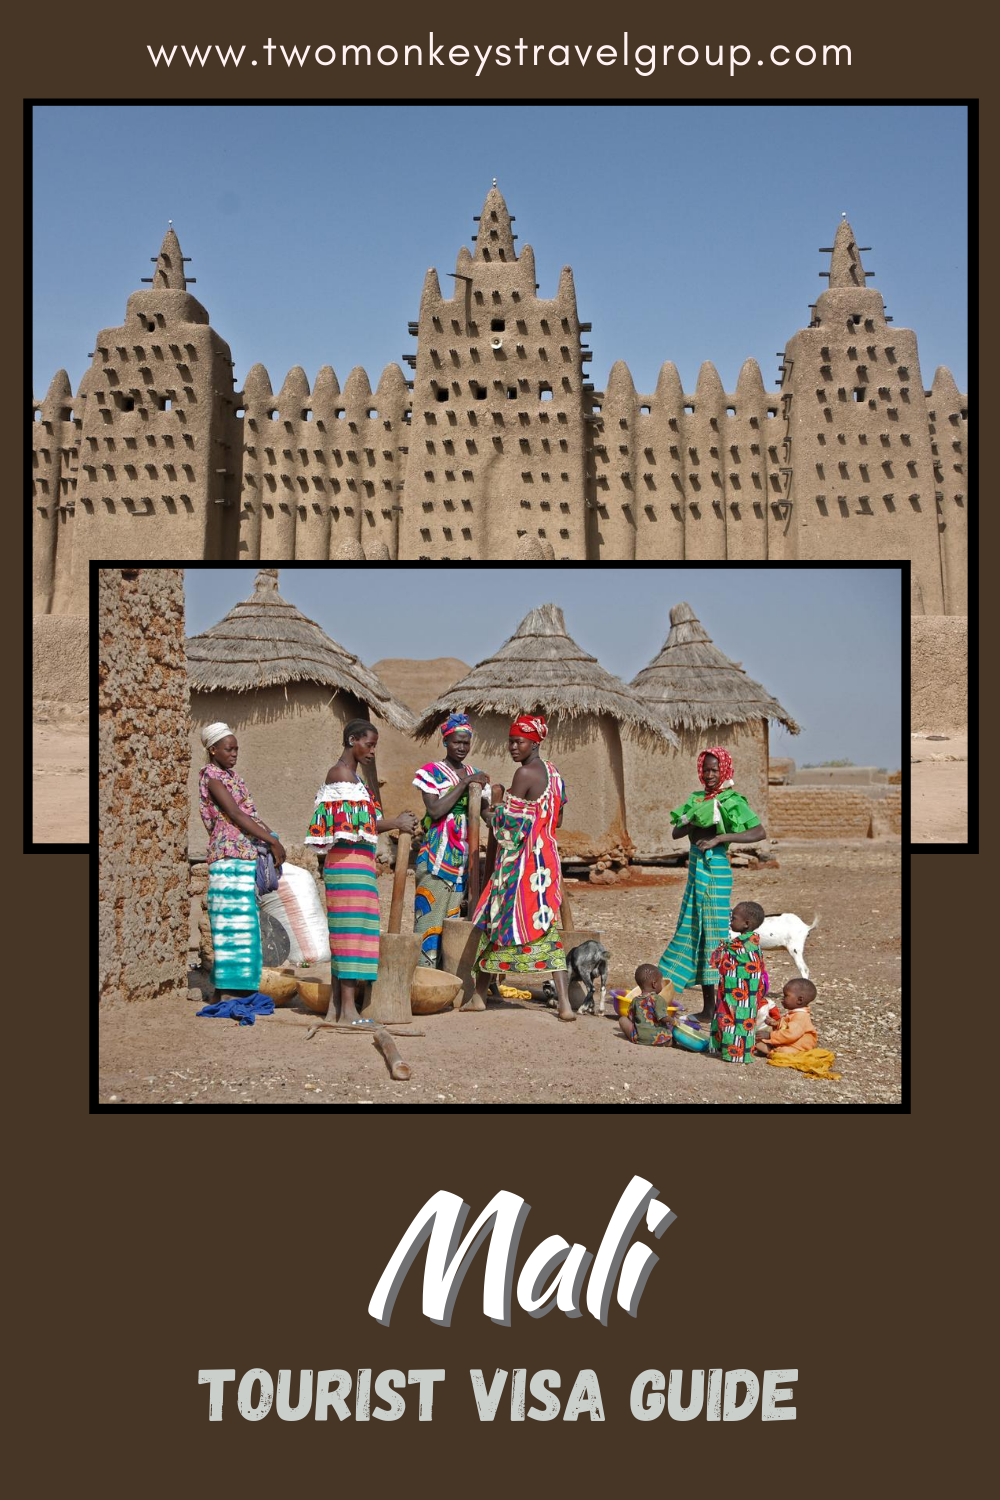 How to Get a Mali Tourist Visa in London for British Citizens